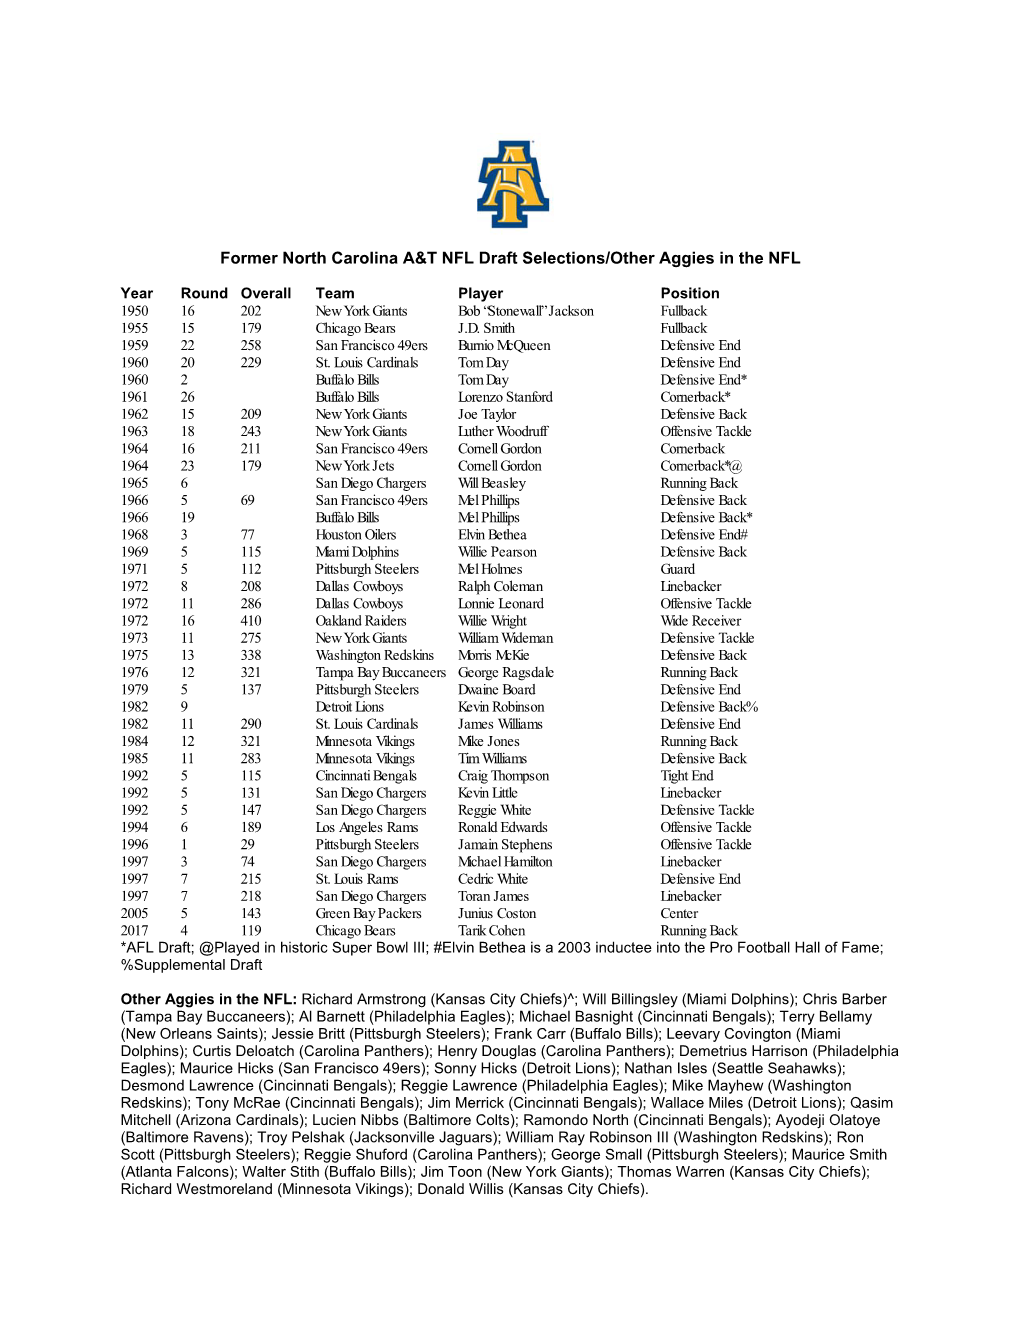 Former North Carolina A&T NFL Draft Selections/Other Aggies in The